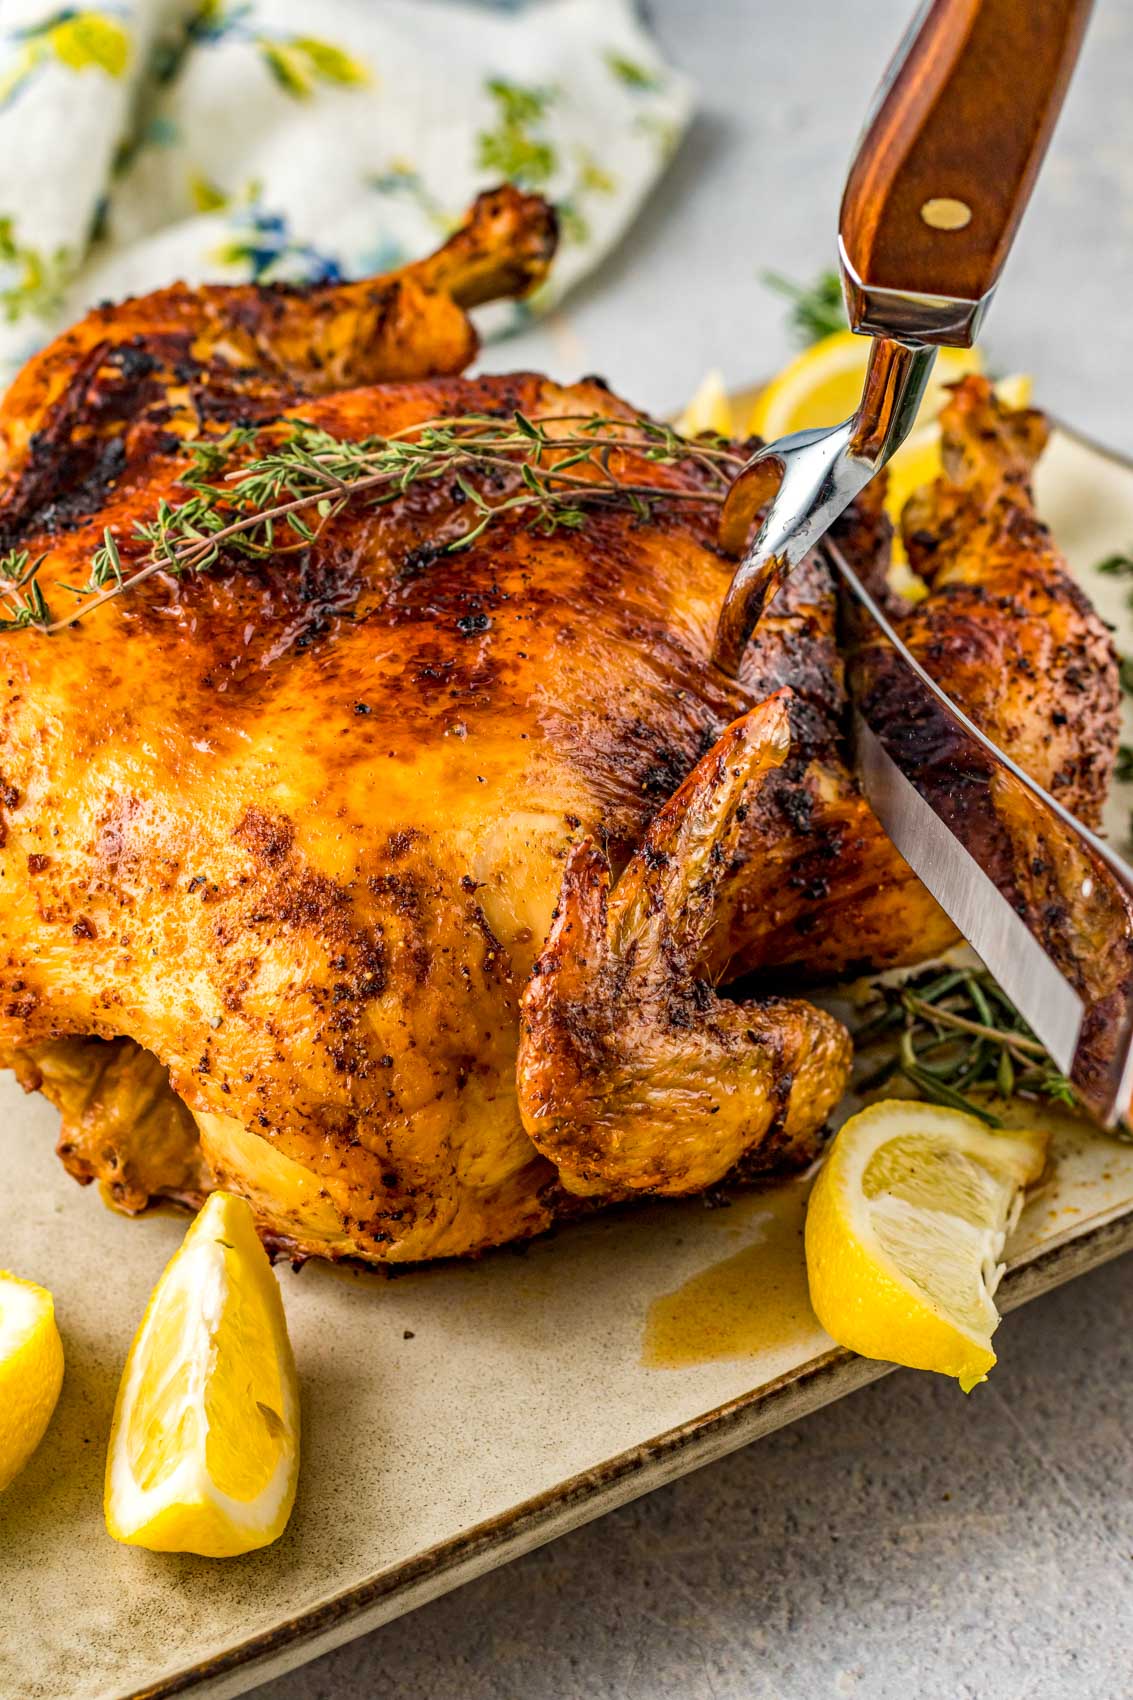 cutting into a golden, juicy chicken with herbs around